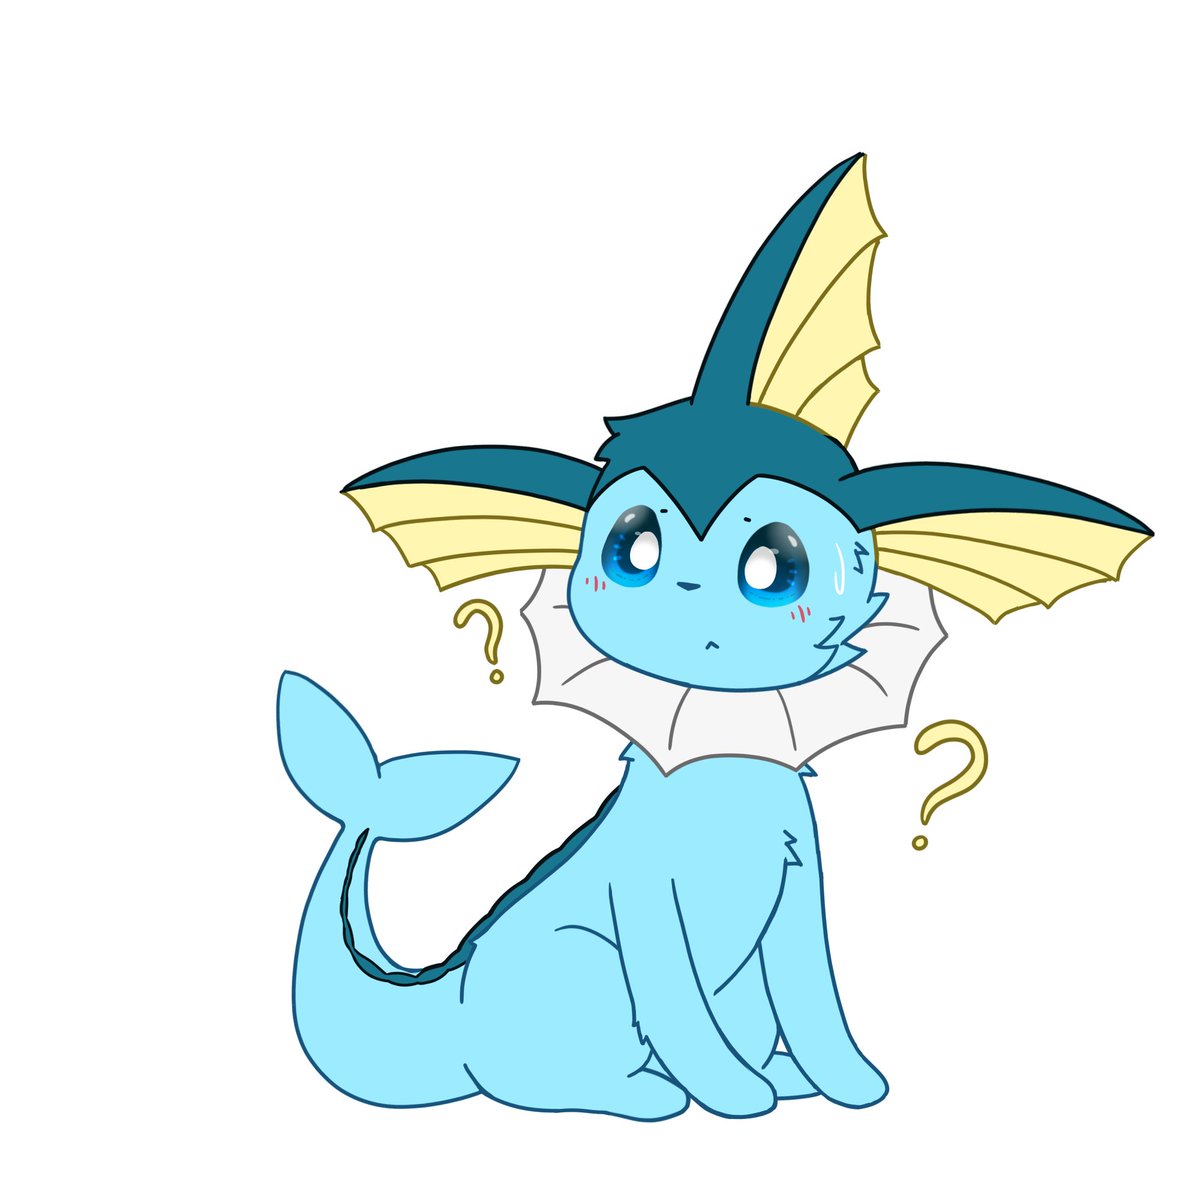 #pokemon #vaporeon
Have an old and incomplete drawing of a confused feesh